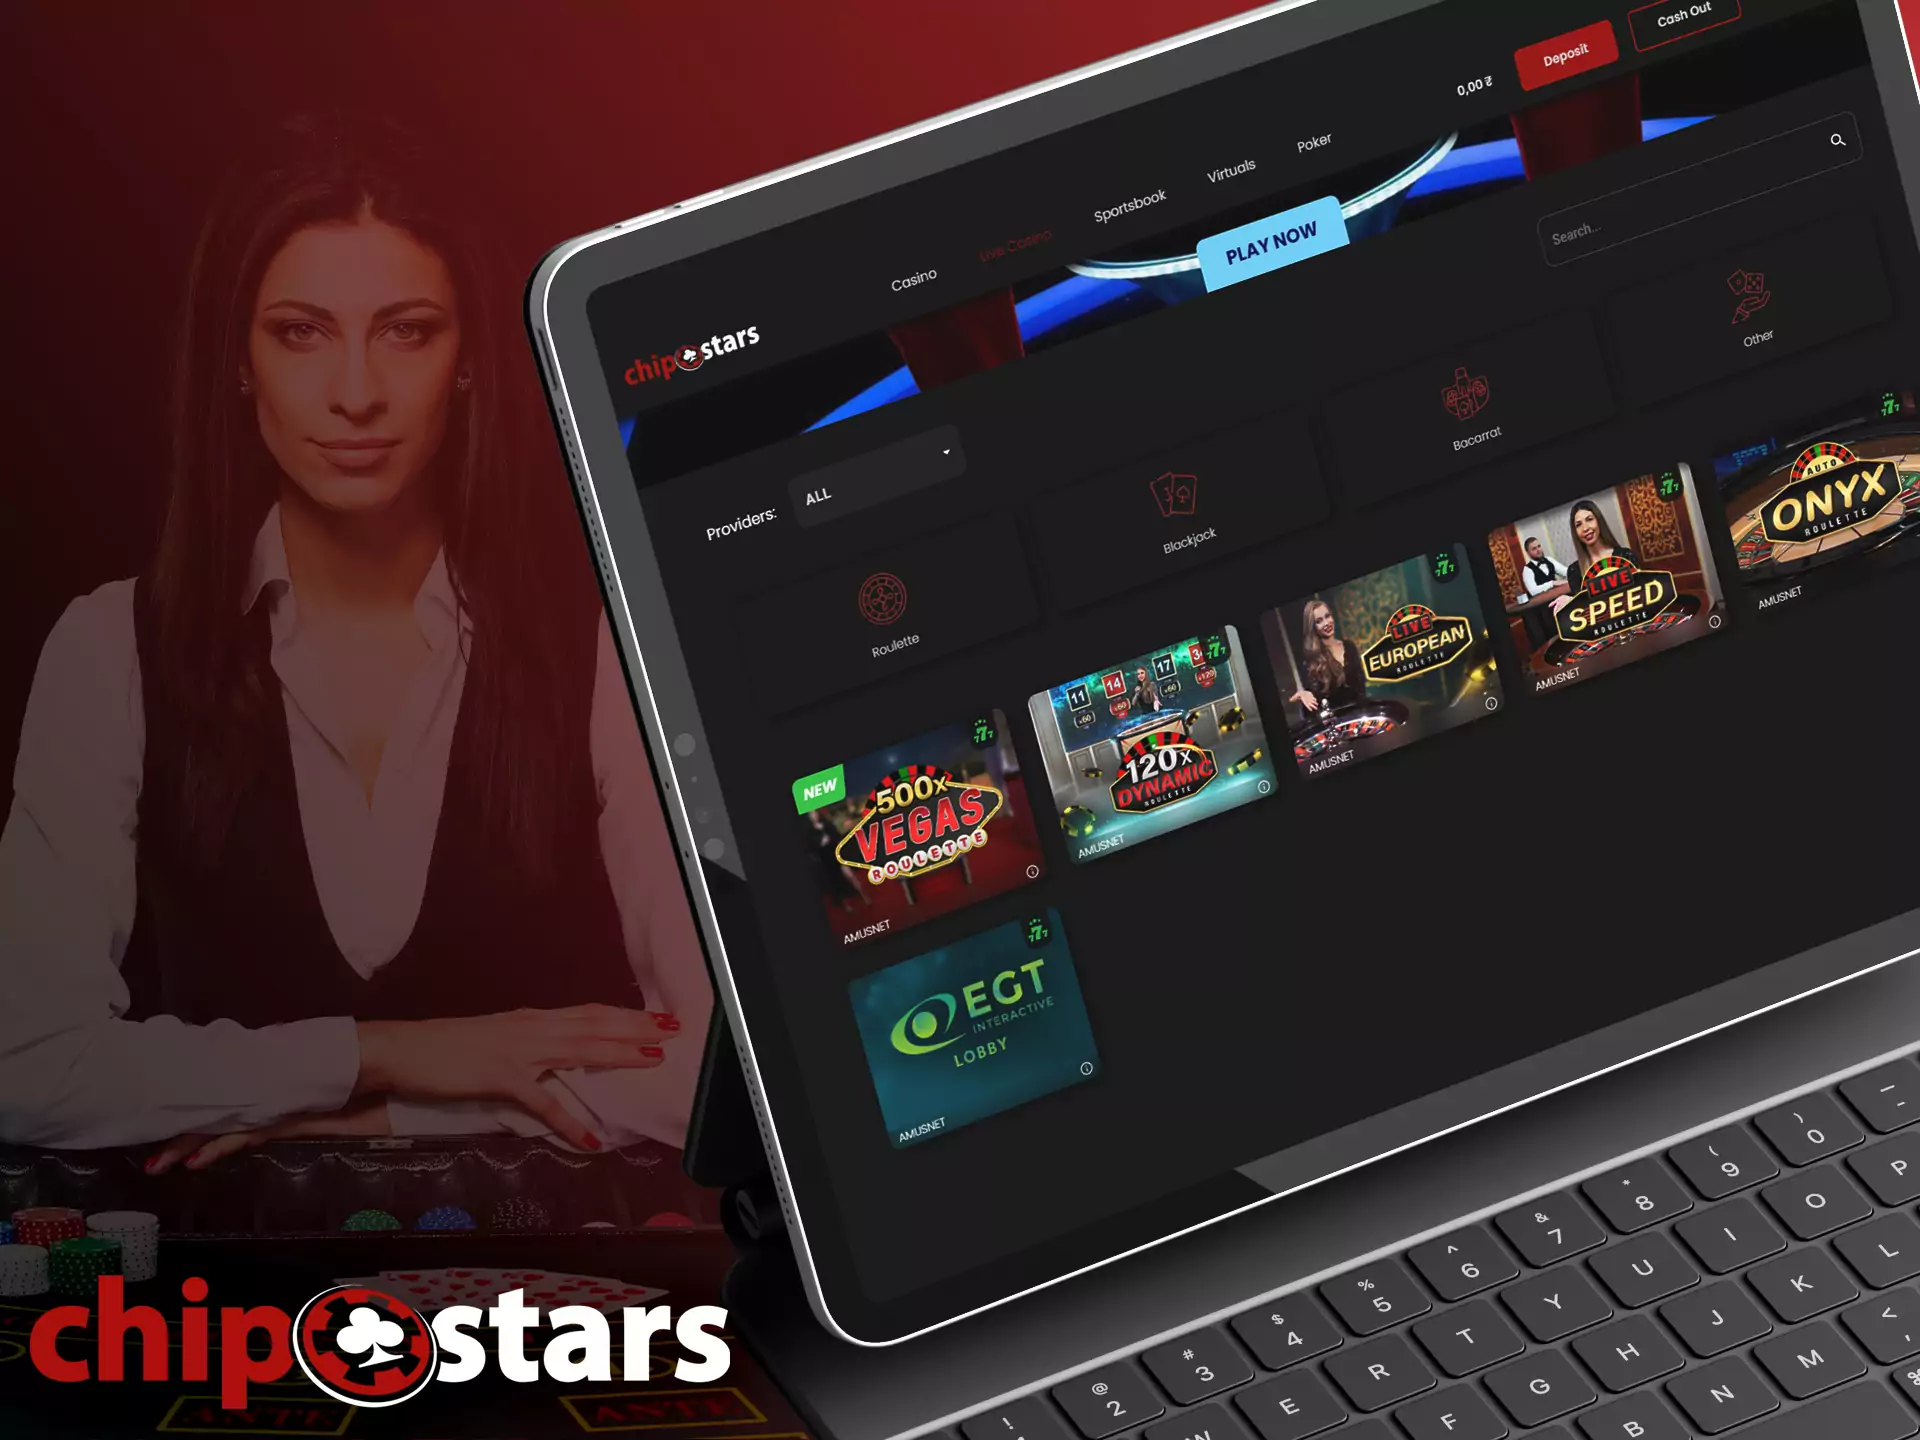 If you need real contact during playing, visit the Chipstars Live Casino.